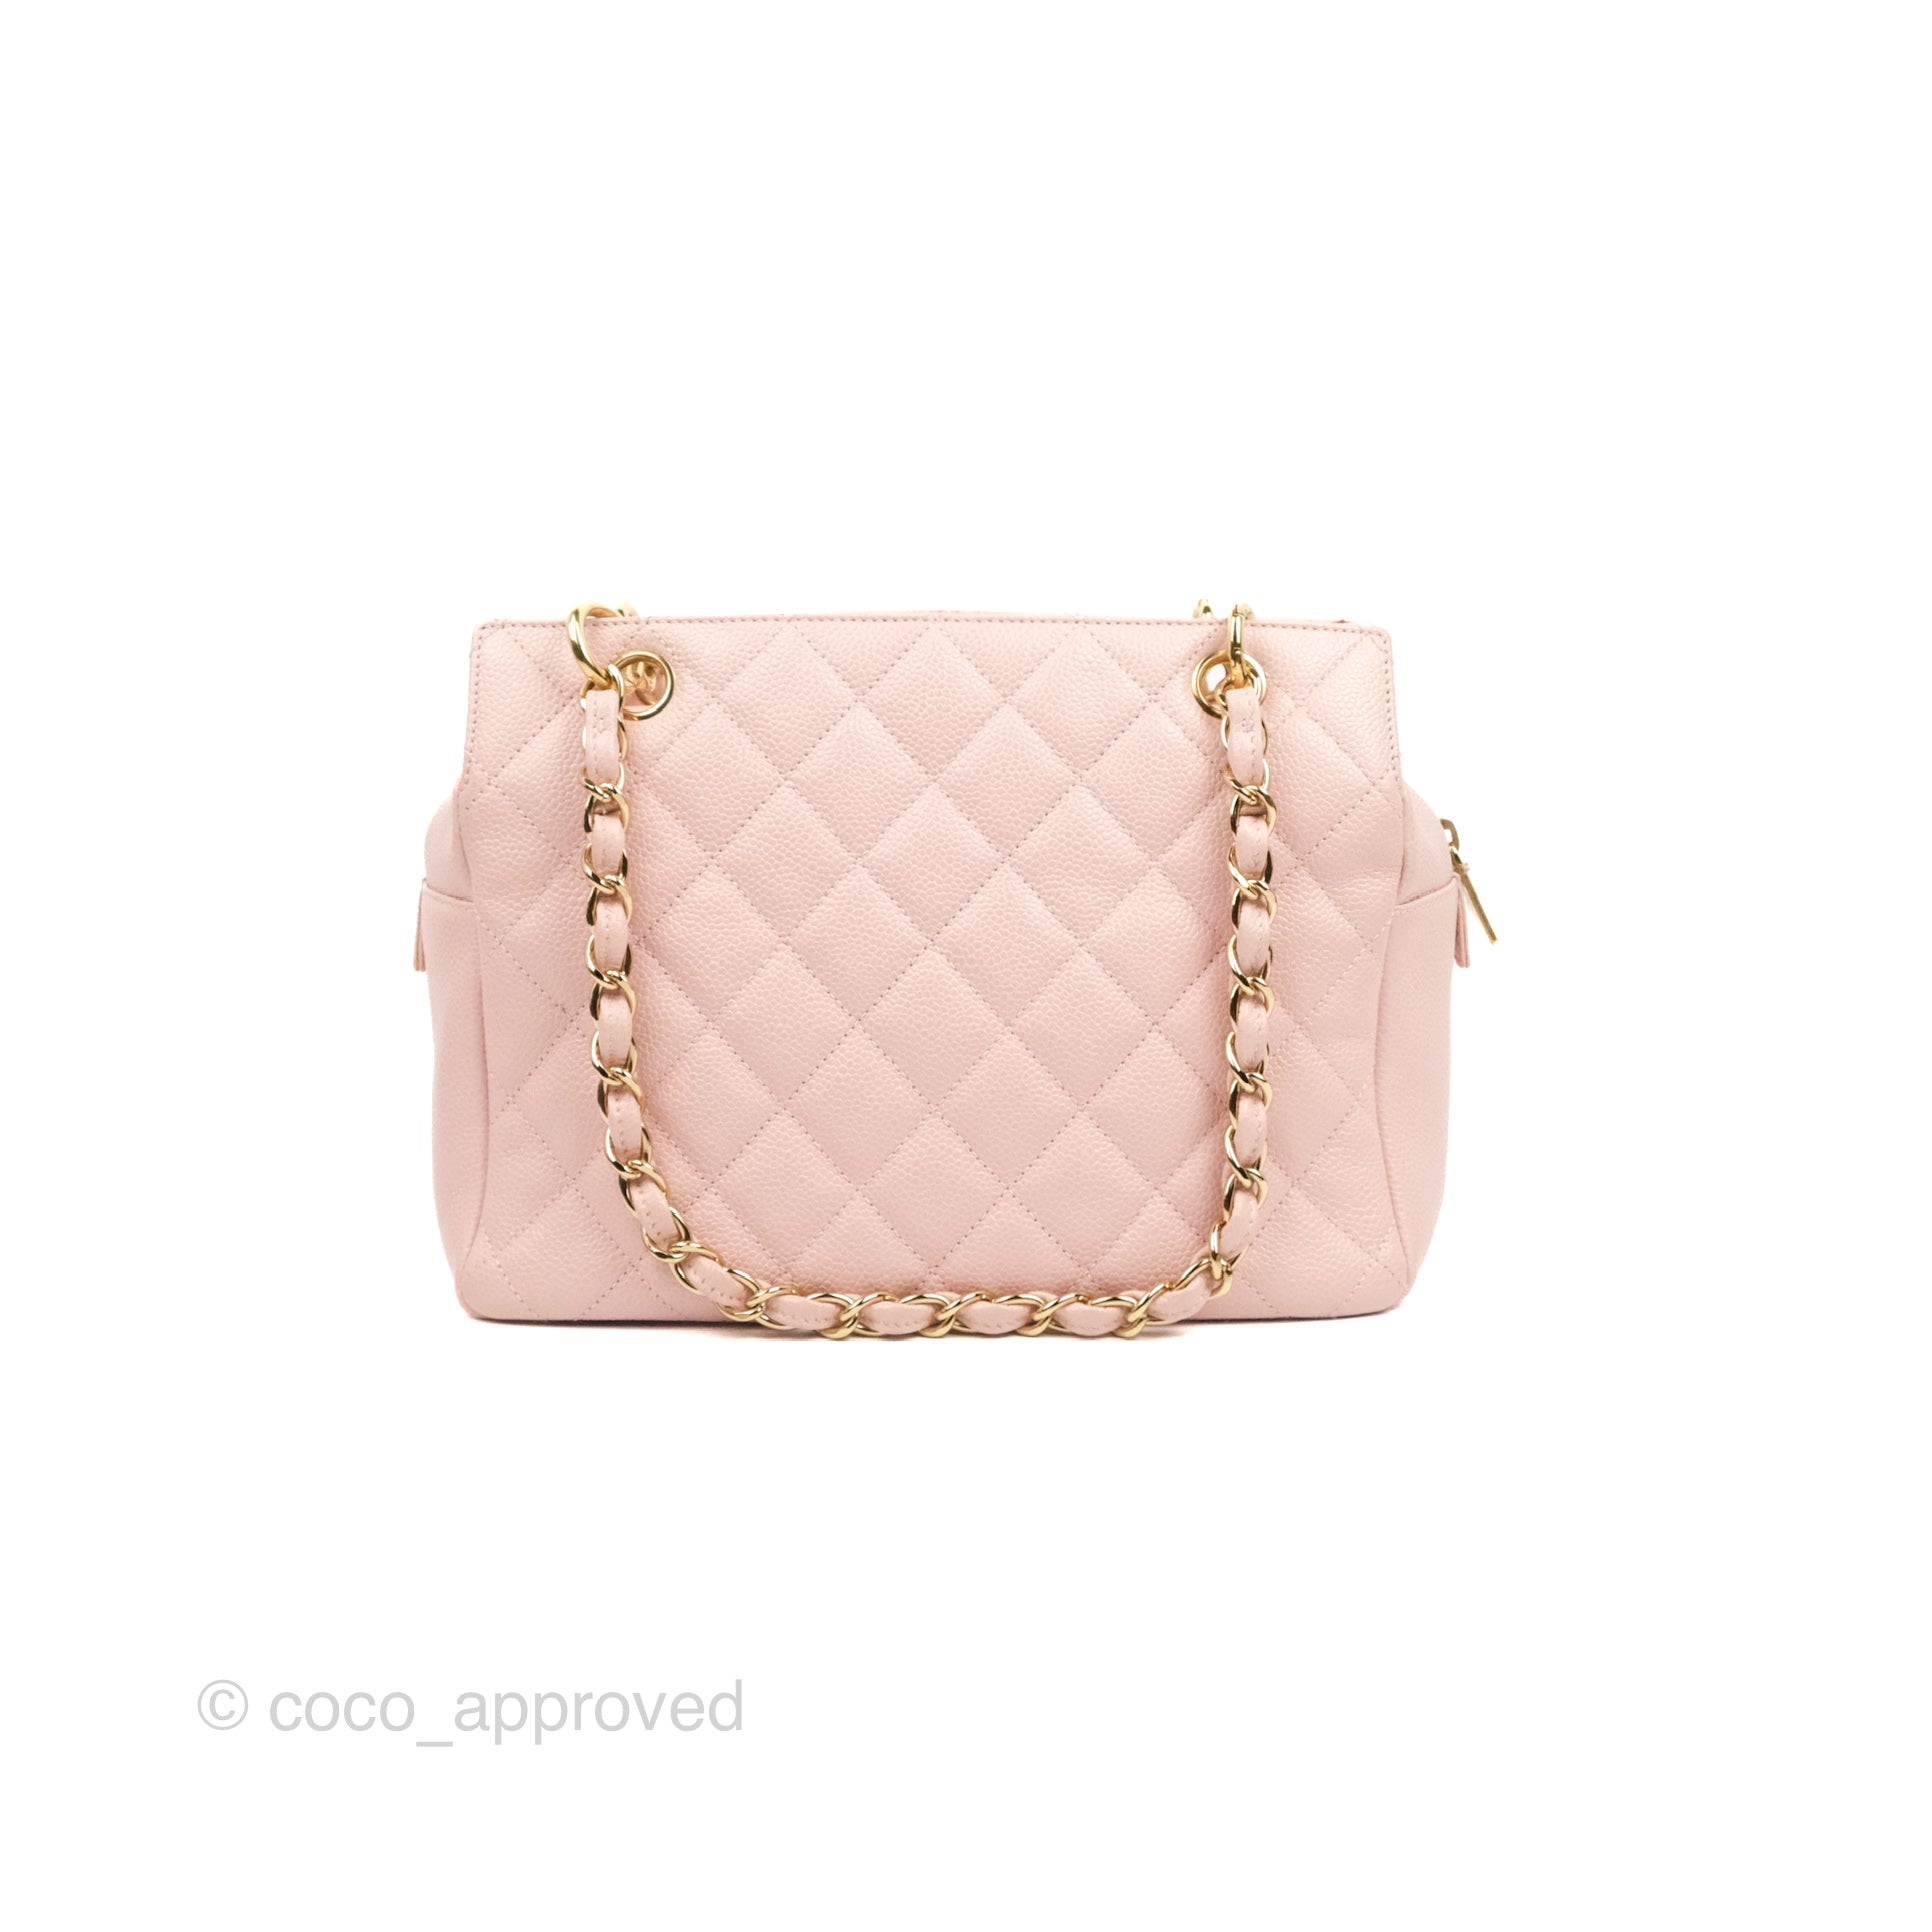 pink coco chanel bag authentic